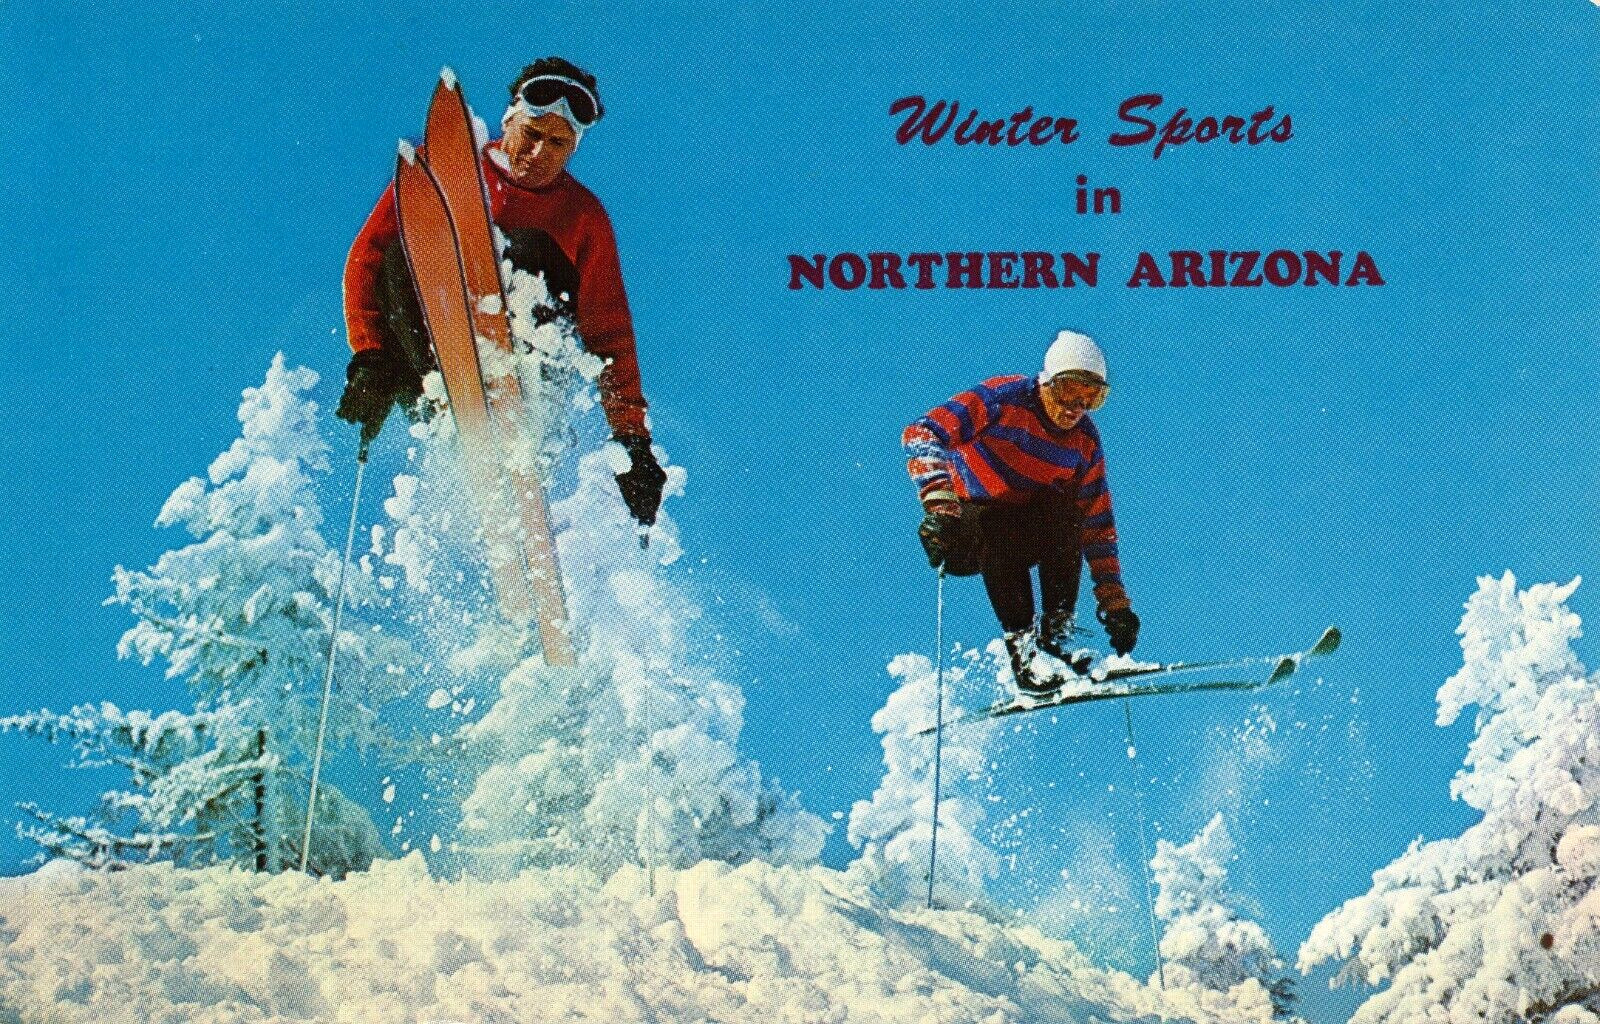 Winter Sports in Northern Arizona skiing vintage unposted